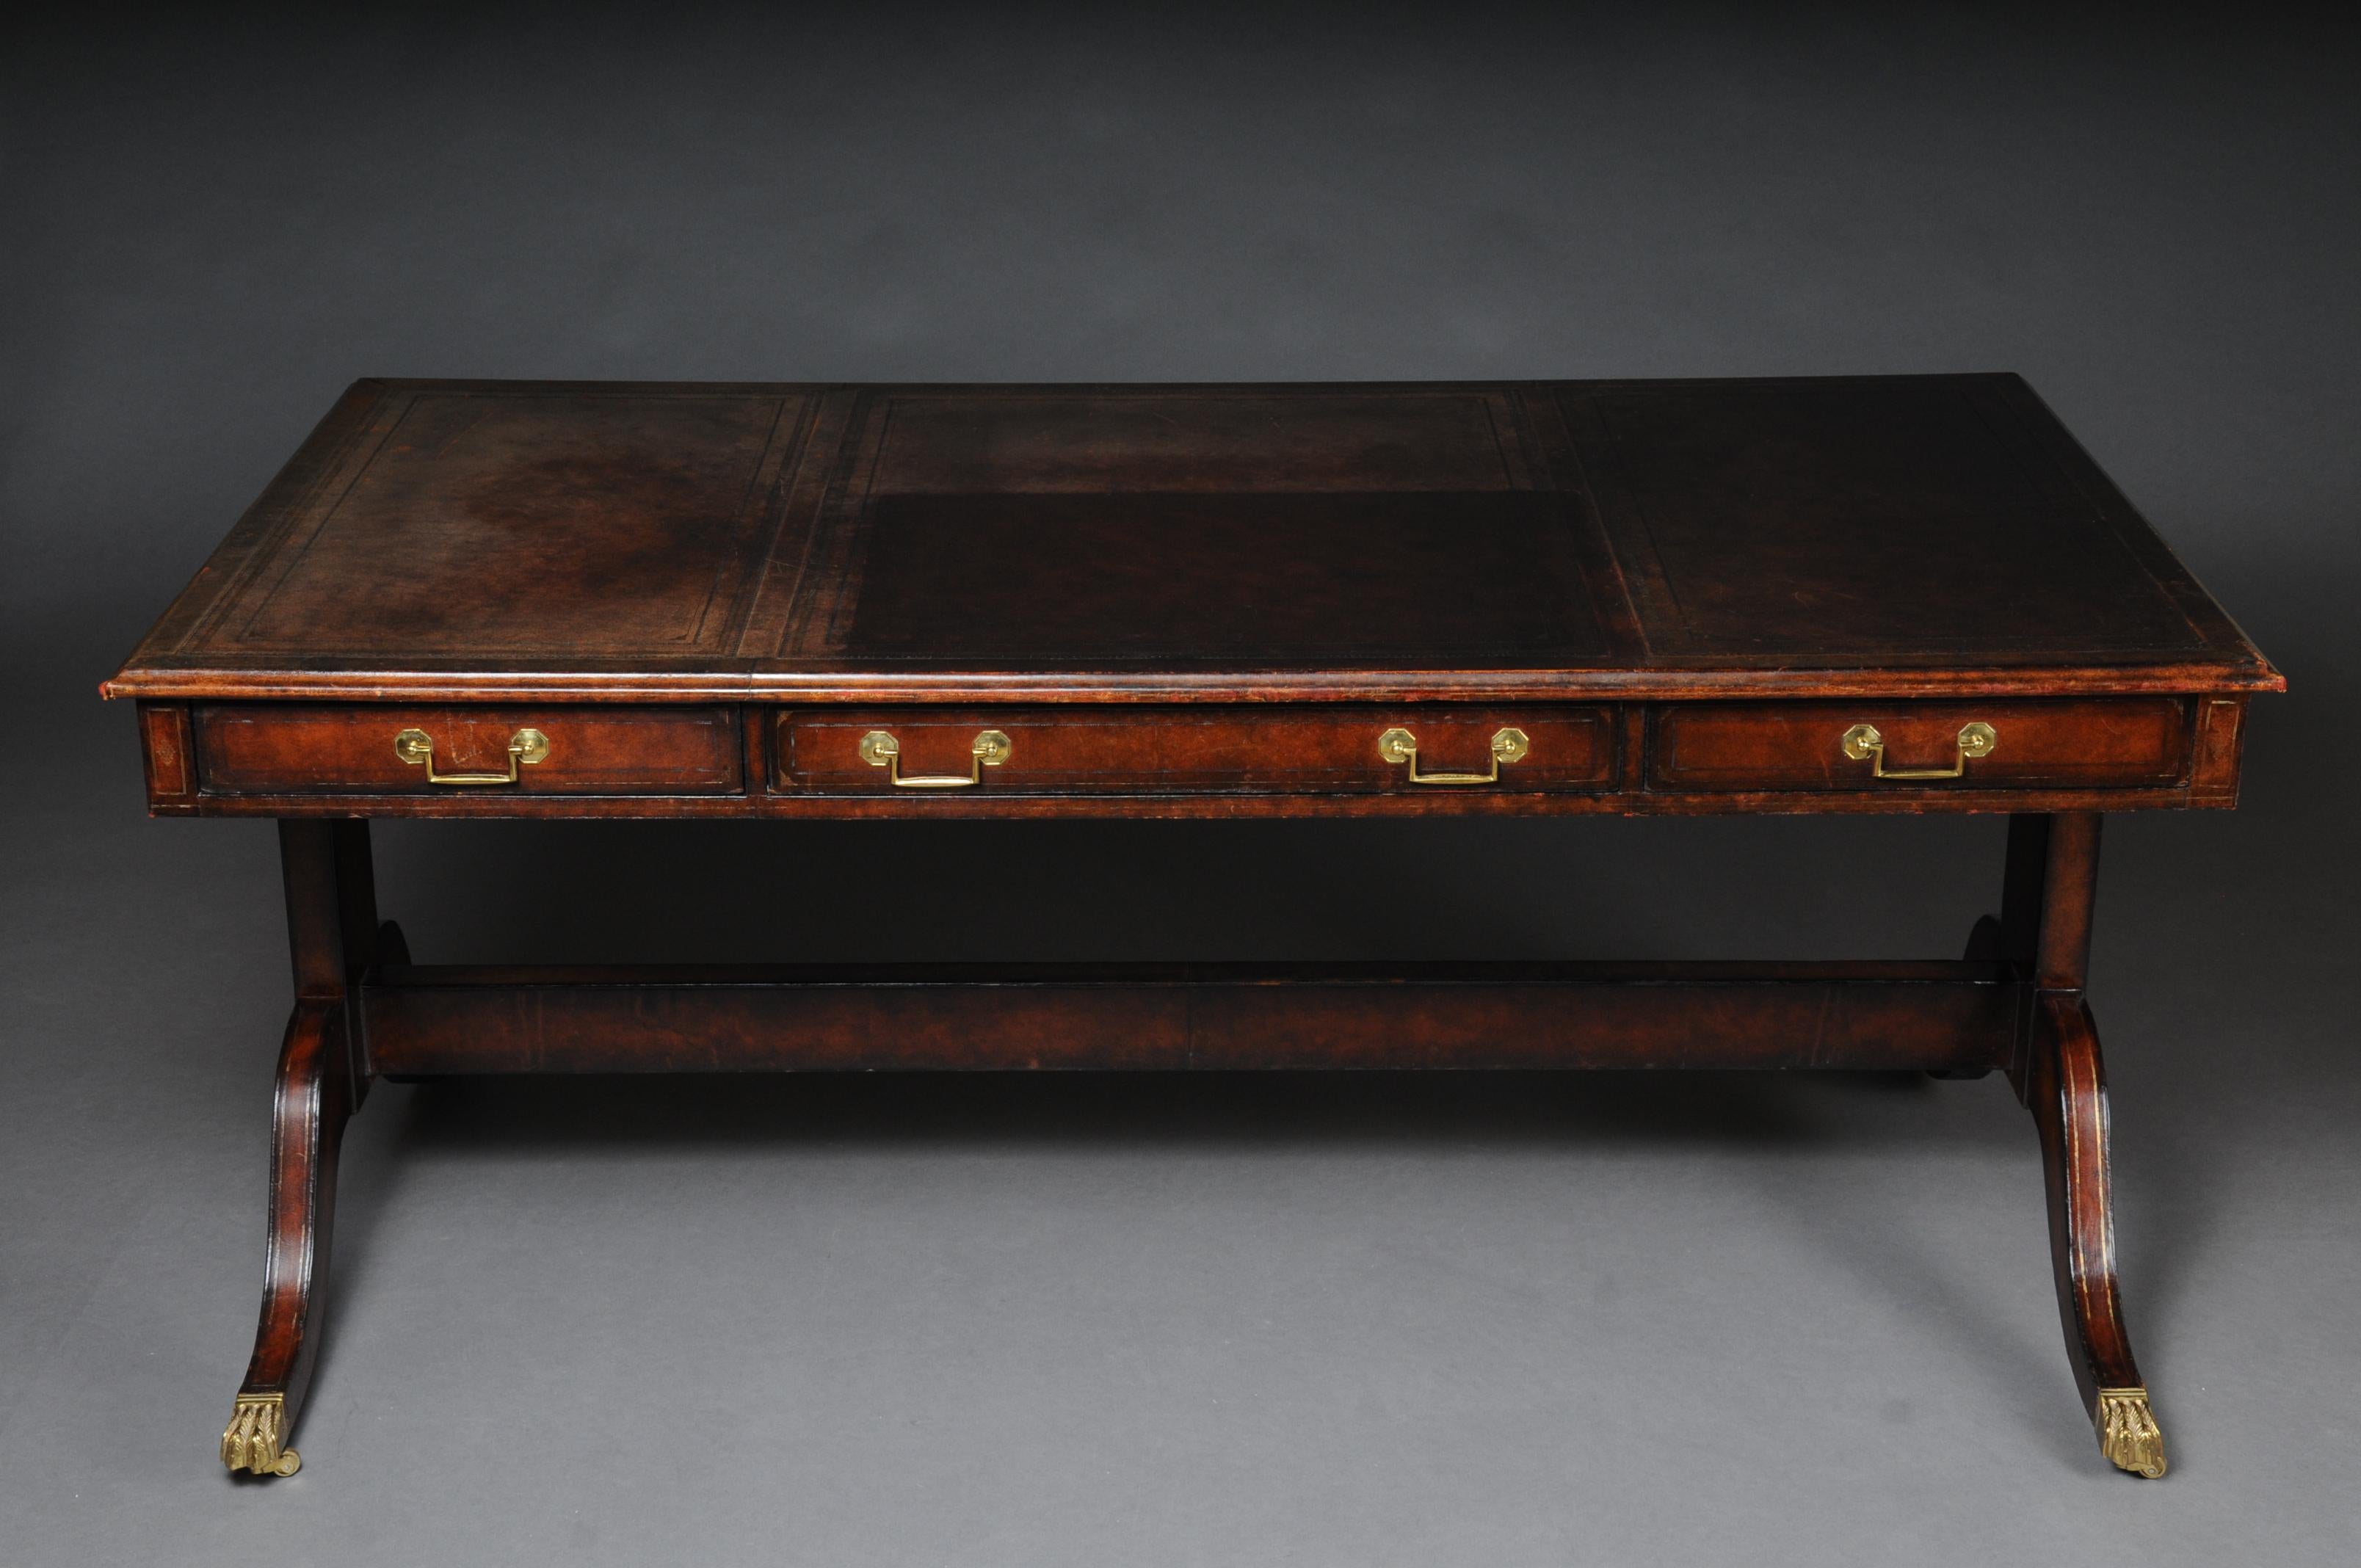 Both sides profiled three-door frame, slightly protruding tabletop. Writing surface decorated with exceptional gold embossing. Victoria style.
Body completely covered with leather
the table has castors on the feet
(L-146).